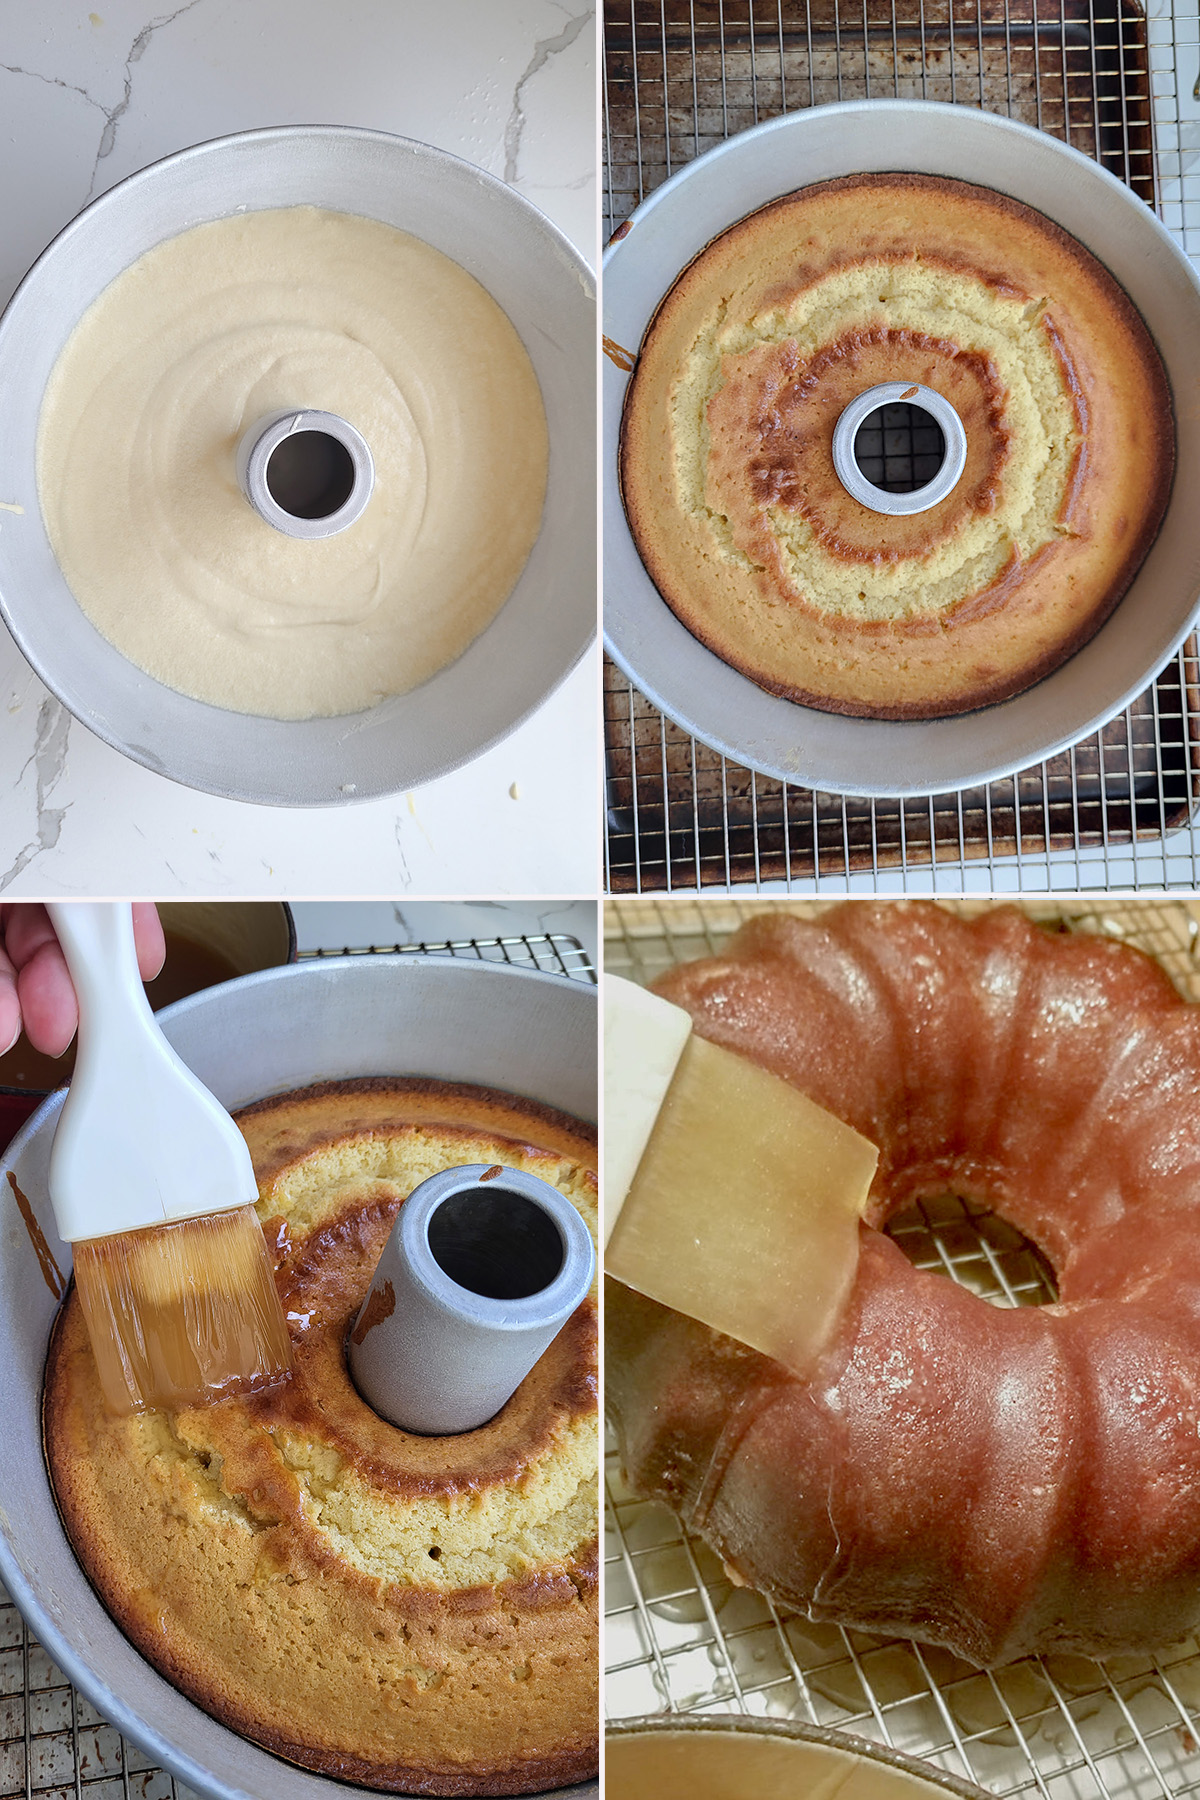 Irish Whiskey cake before and after baking and after glazing.